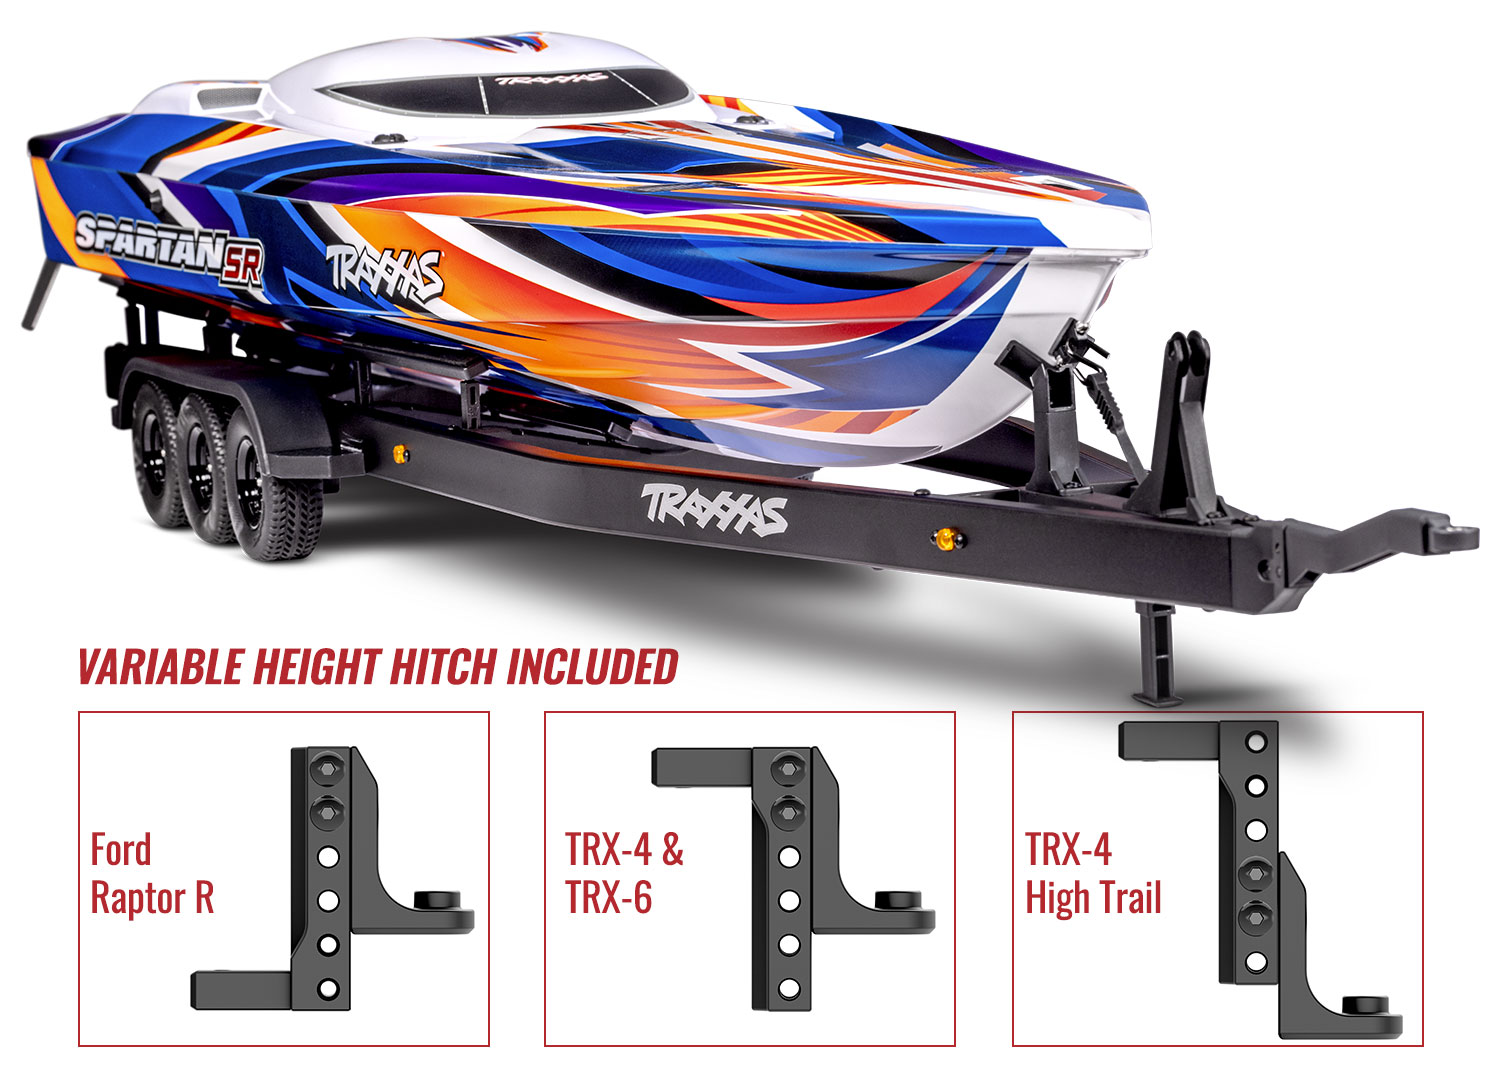 Traxxas Boat Trailer (#10350) with included variable height trailer hitch